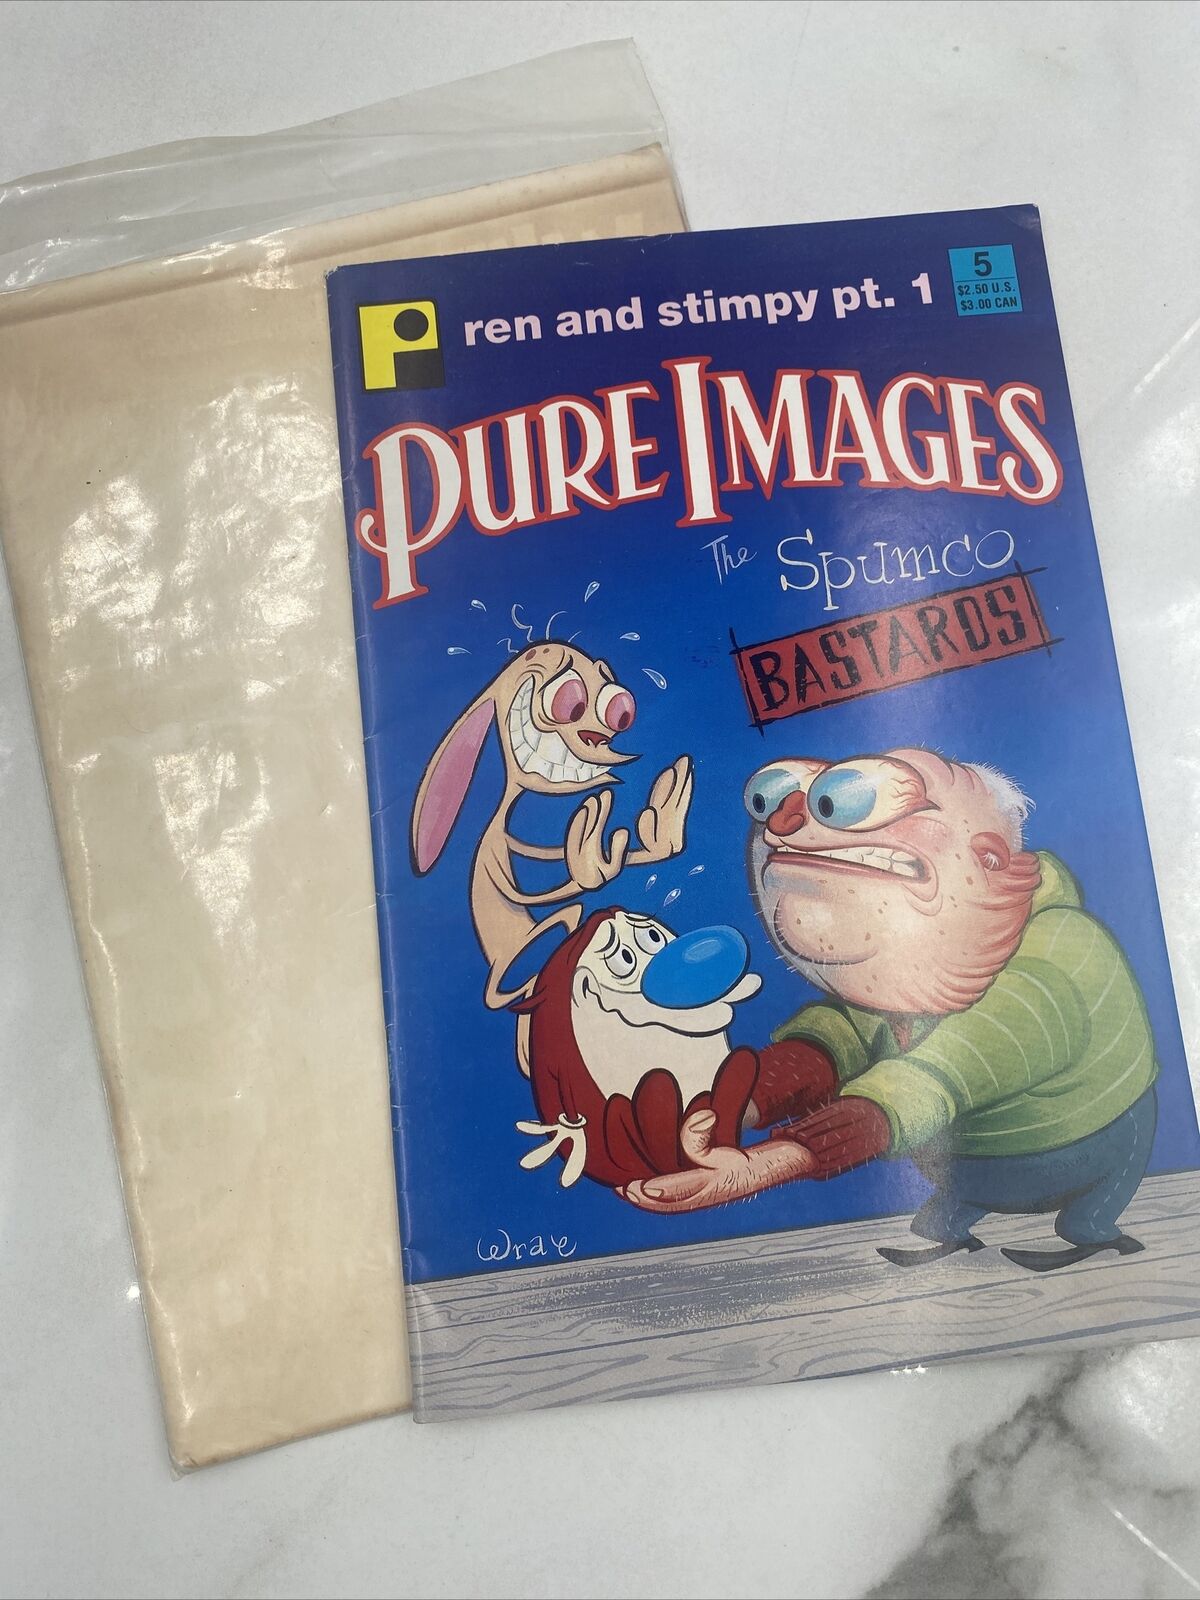 Pure Images #5 Bill Wray Pre-Dates Ren and Stimpy #1 1990 Magazine / Comic